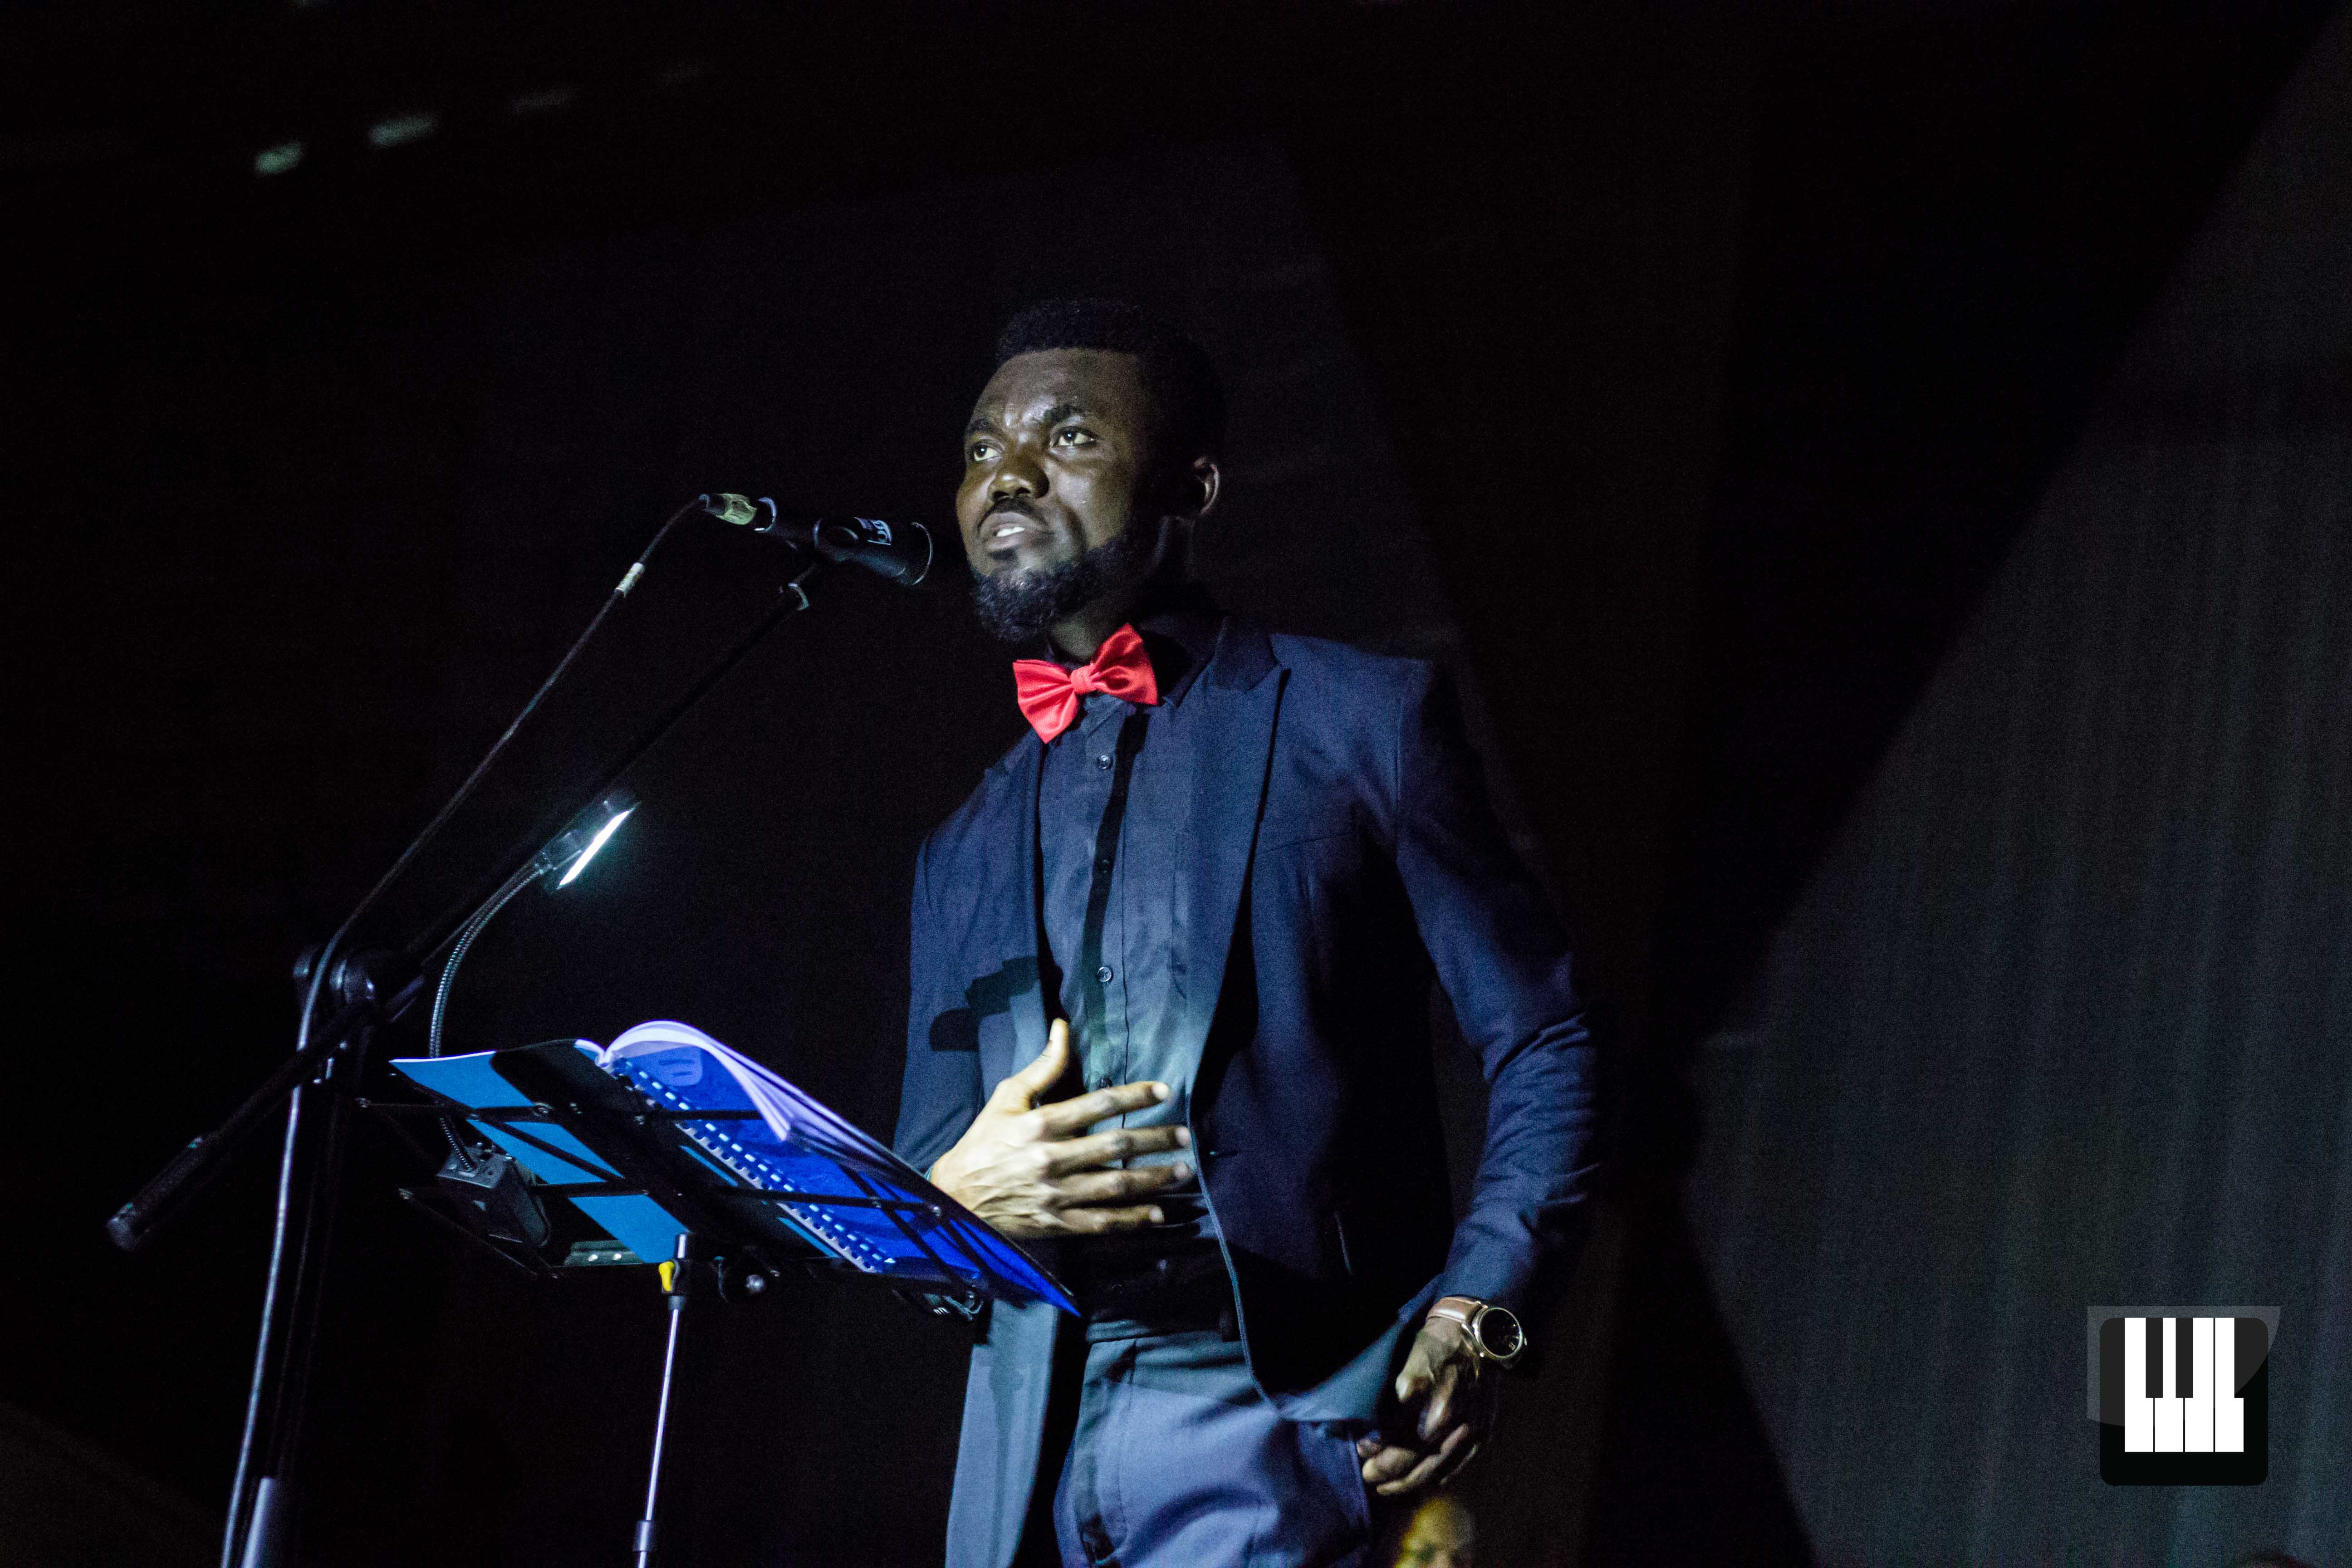 Klassicals of the Season at Easter Seasonal House's seasonal concert, Klassicals of the Season, explored the life of Christ in an unorthodox way at an intimate concert held in Accra. Jesse talks about his first Seasonal House concert.